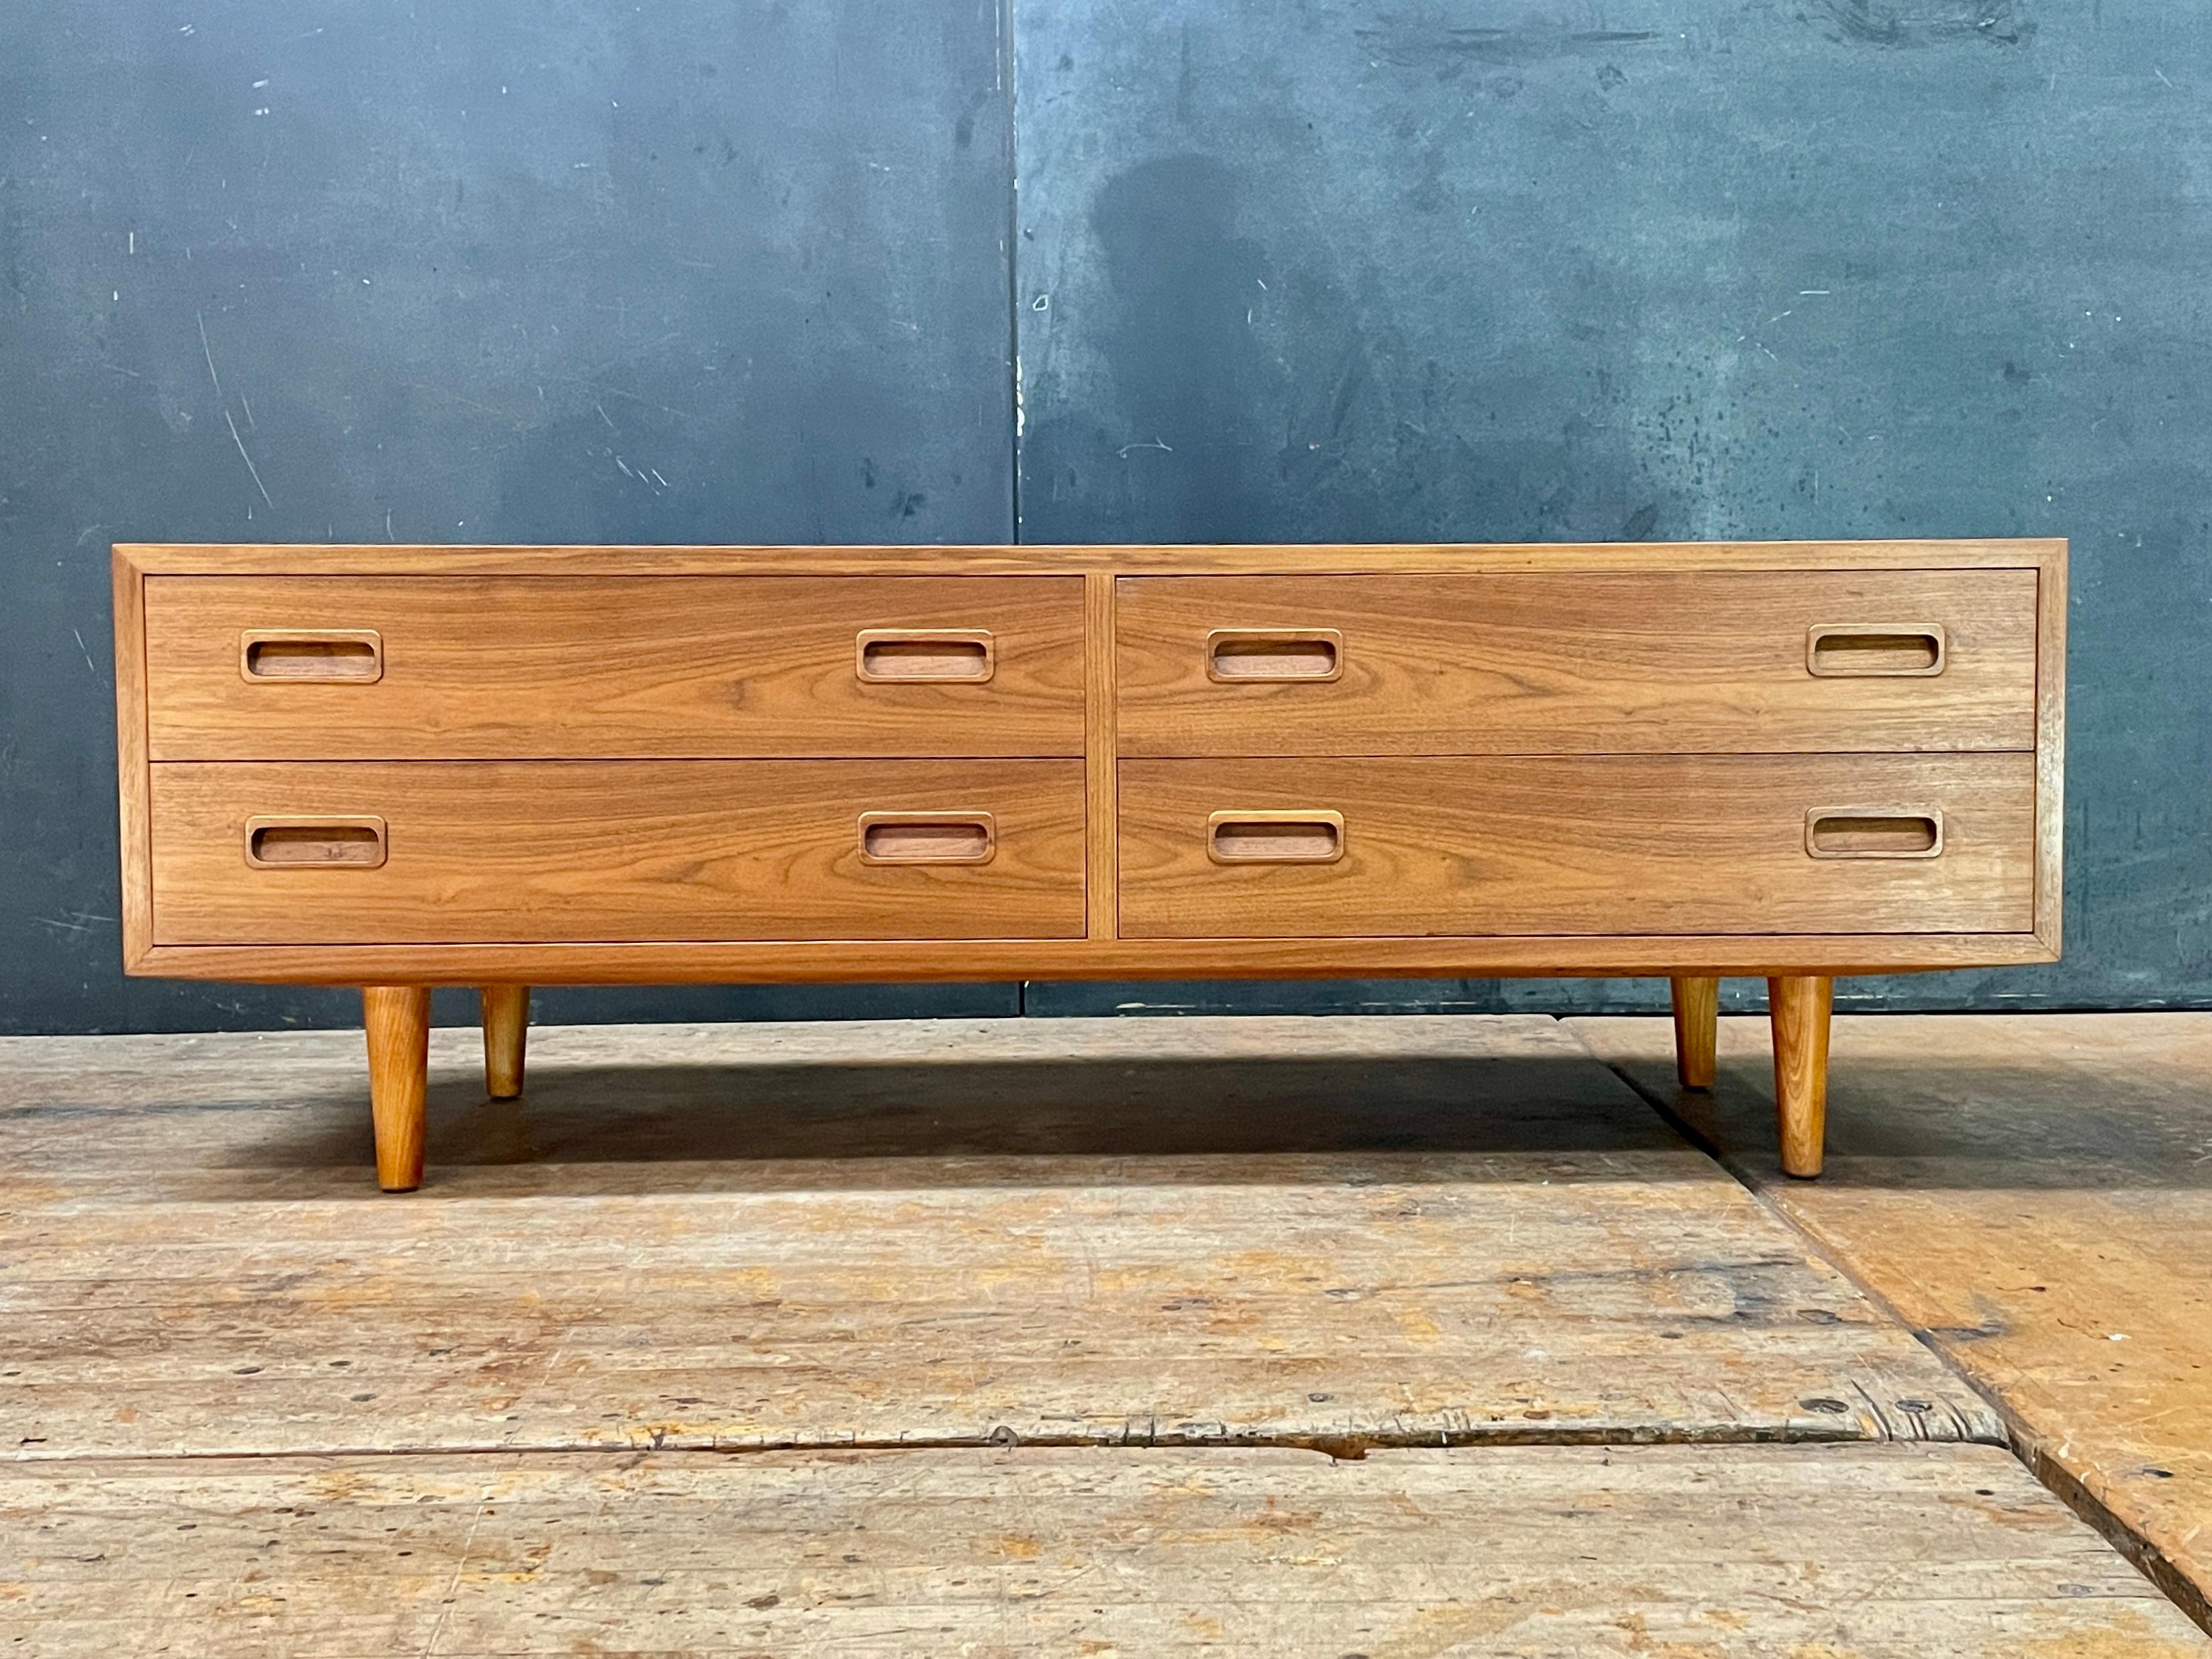 Uncommon low chest of drawers, with minimalist inset drawer pulls, and wonderful figured teak grain, bookmatched across the facing drawer surfaces. Smooth functioning drawers.

Measures: L 54.5 x D 16.88 x H 18.5 in.